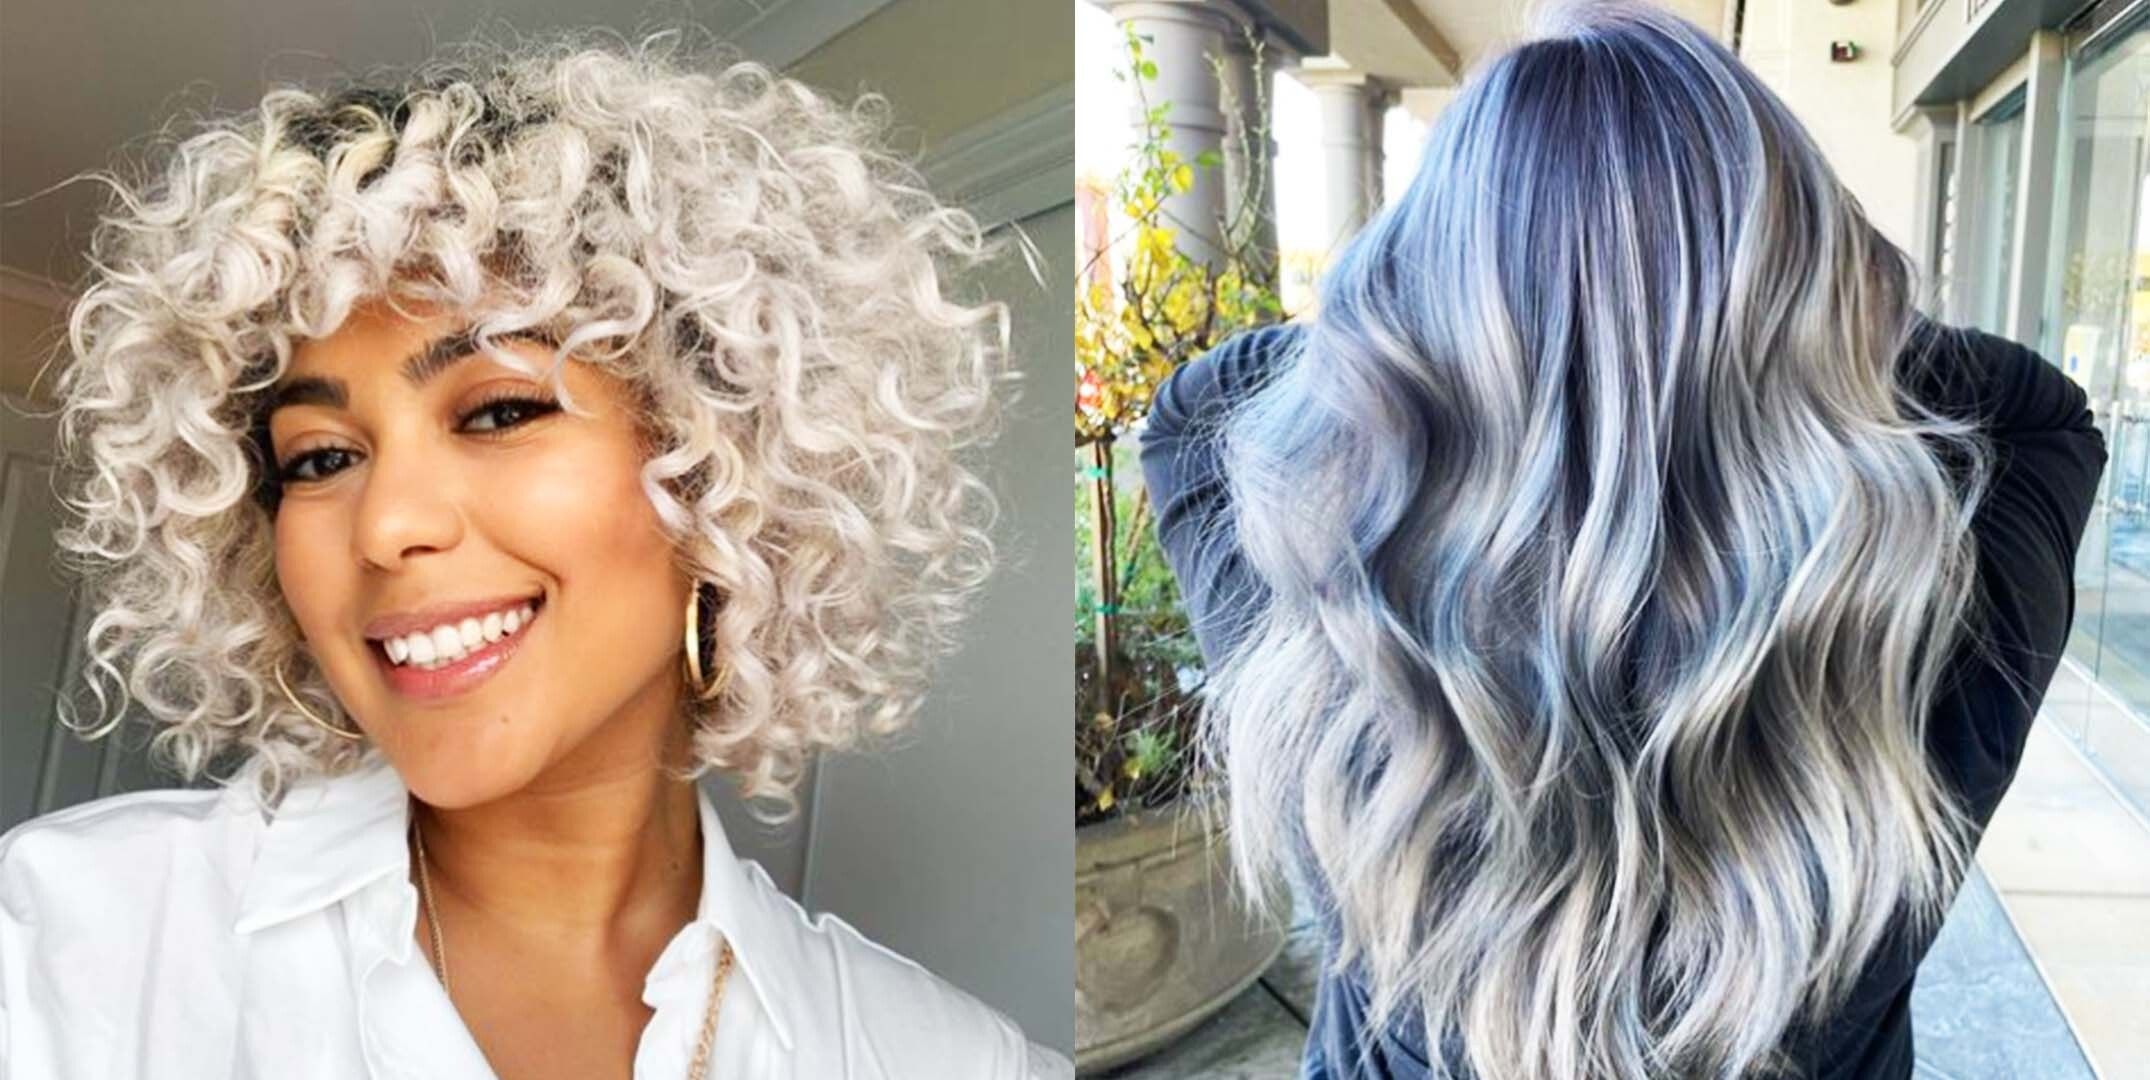 1. "How to Style Blue Hair for the Office" 
2. "Blue Hair Color Ideas for the Workplace" 
3. "Professional Hairstyles for Blue Hair" 
4. "Blue Hair in Corporate Environments: Dos and Don'ts" 
5. "Office-Friendly Hair Accessories for Blue Hair" 
6. "Maintaining Blue Hair in a Professional Setting" 
7. "Blue Hair and Dress Code Policies in the Workplace" 
8. "Hairstyles for Blue Hair in Conservative Offices" 
9. "Blue Hair and Job Interviews: What to Consider" 
10. "Managing Blue Hair in a Conservative Work Environment" - wide 6